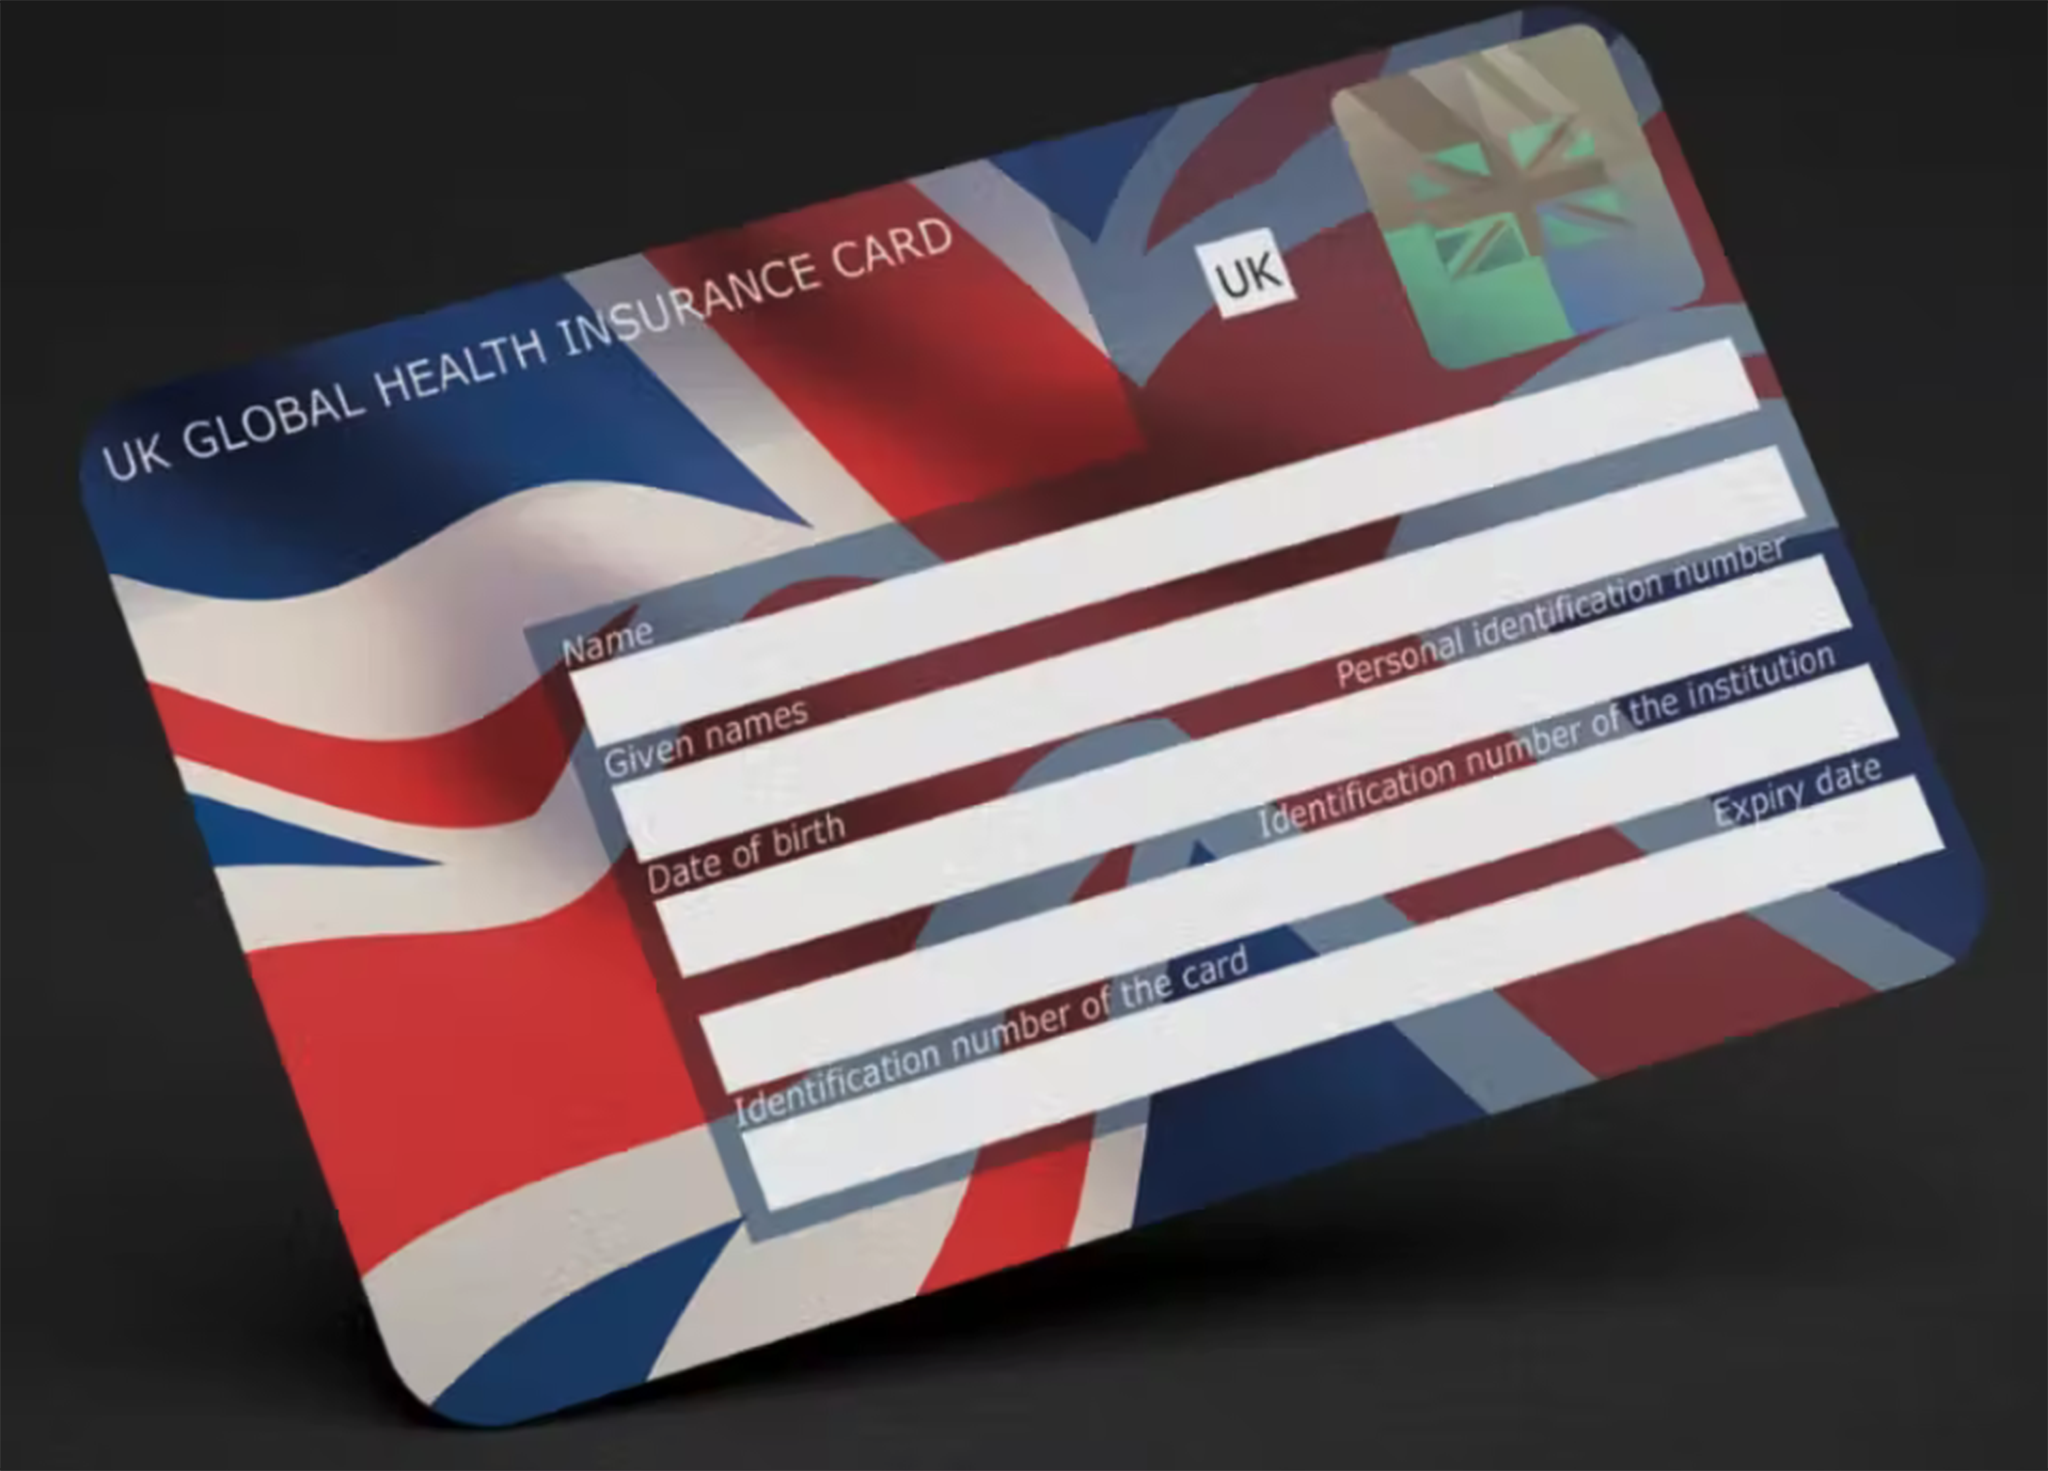 Since Brexit, the UK has issued the Global Health Insurance Card (Ghic) that provides the same cover, but there is no need to replace an Ehic if it is still within date